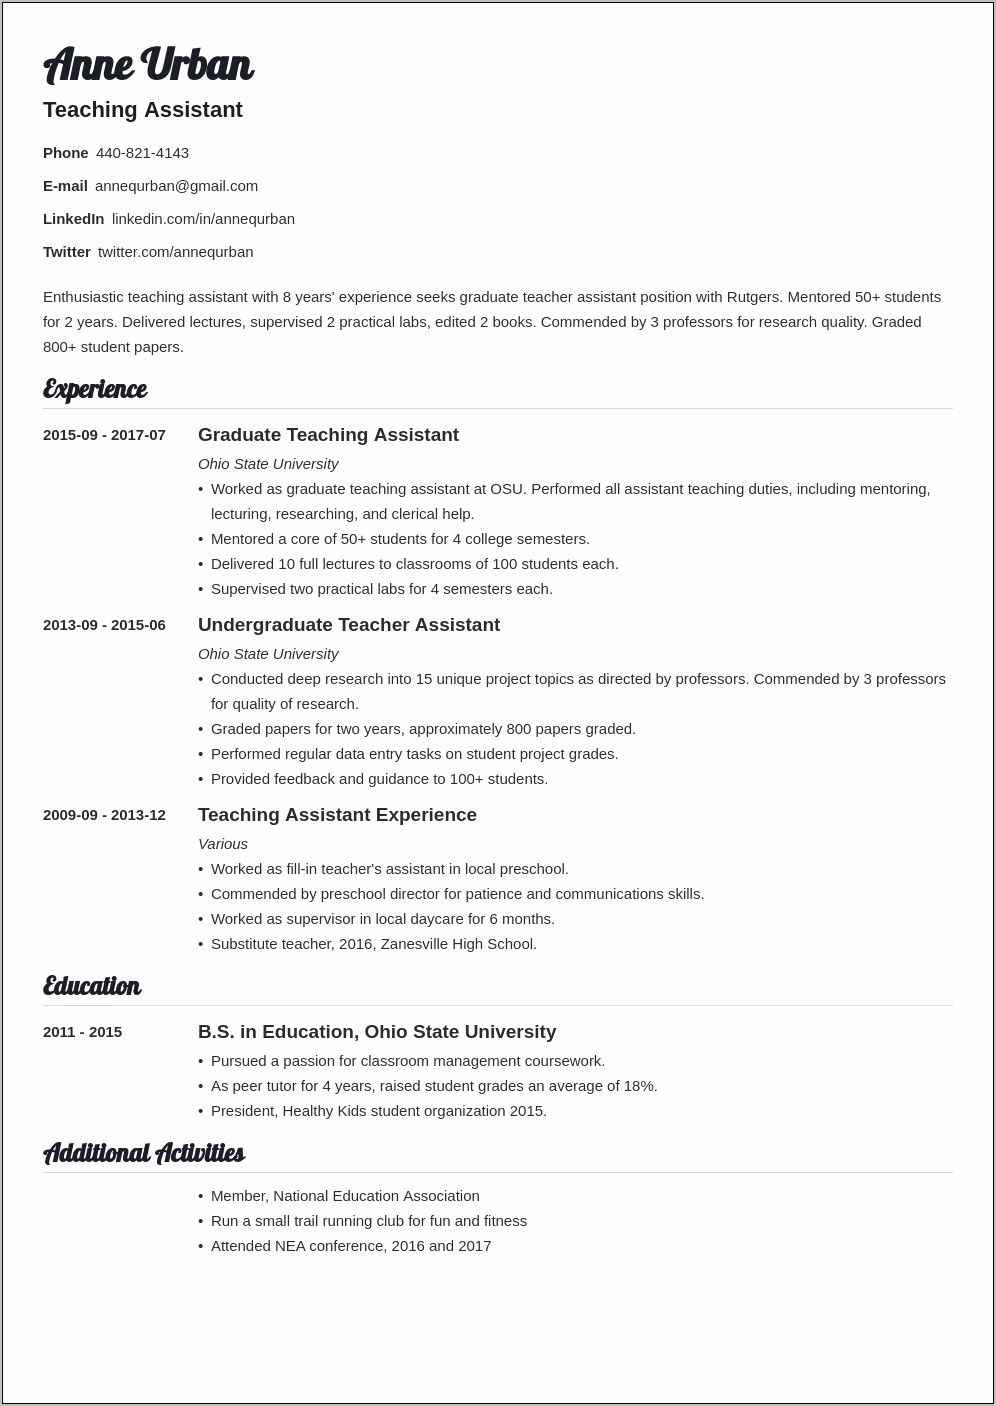 Sample Resume For Teacher Assistant With Experience